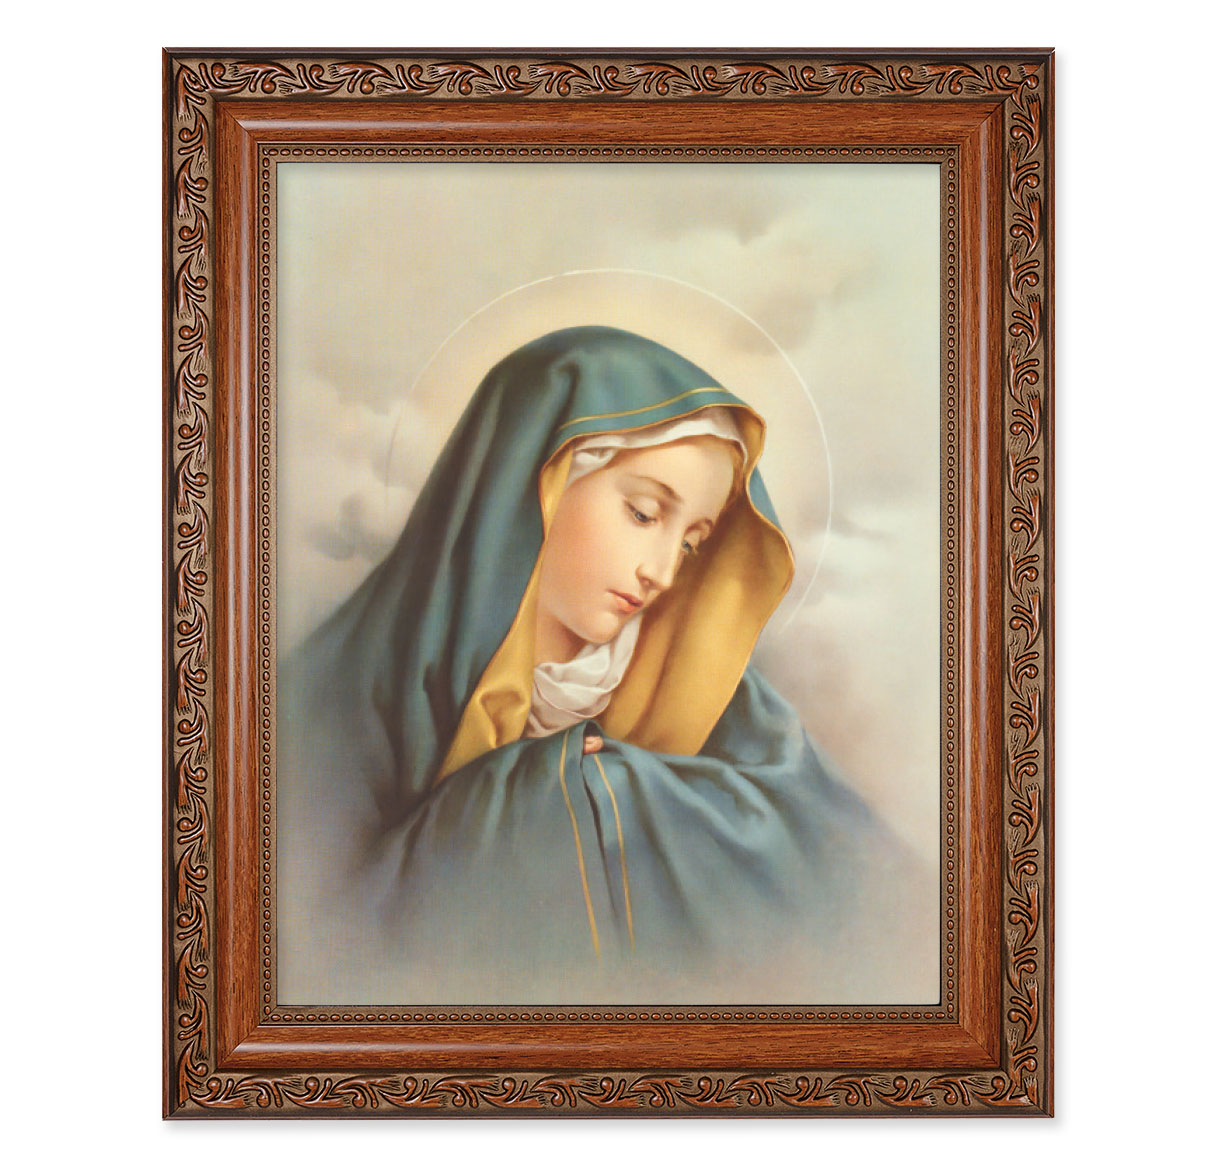 Our Lady of Sorrows Mahogany Finished Framed Art